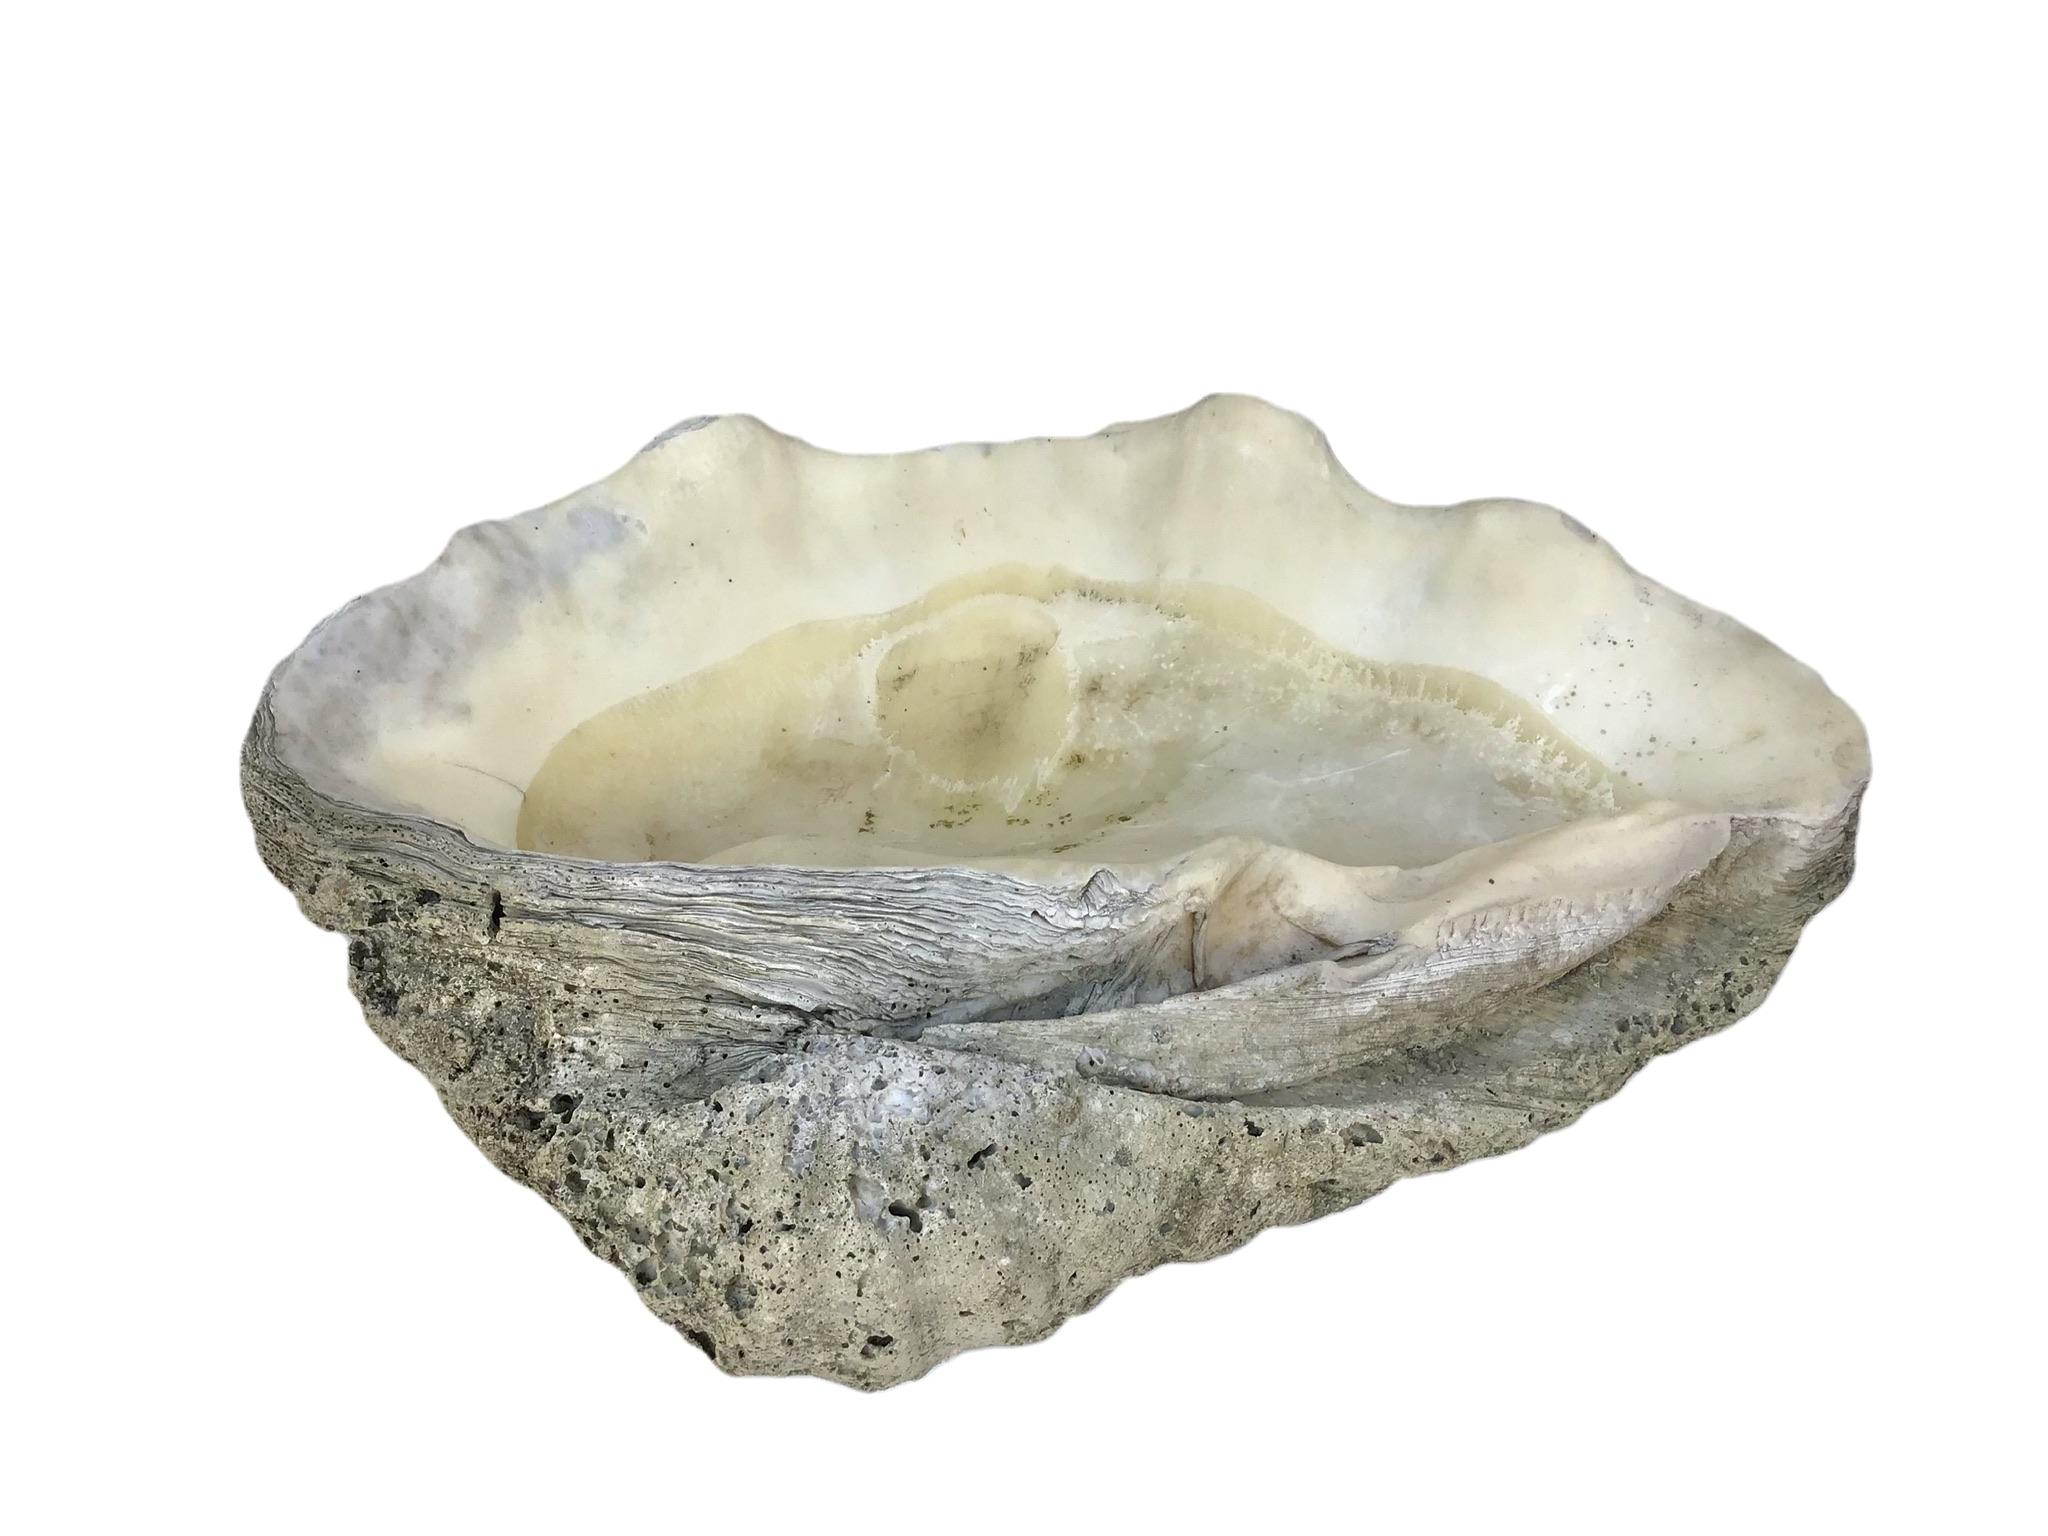 Authentic giant clam shell specimen with its iconic sculptural form and sea inspired colors and textures. 